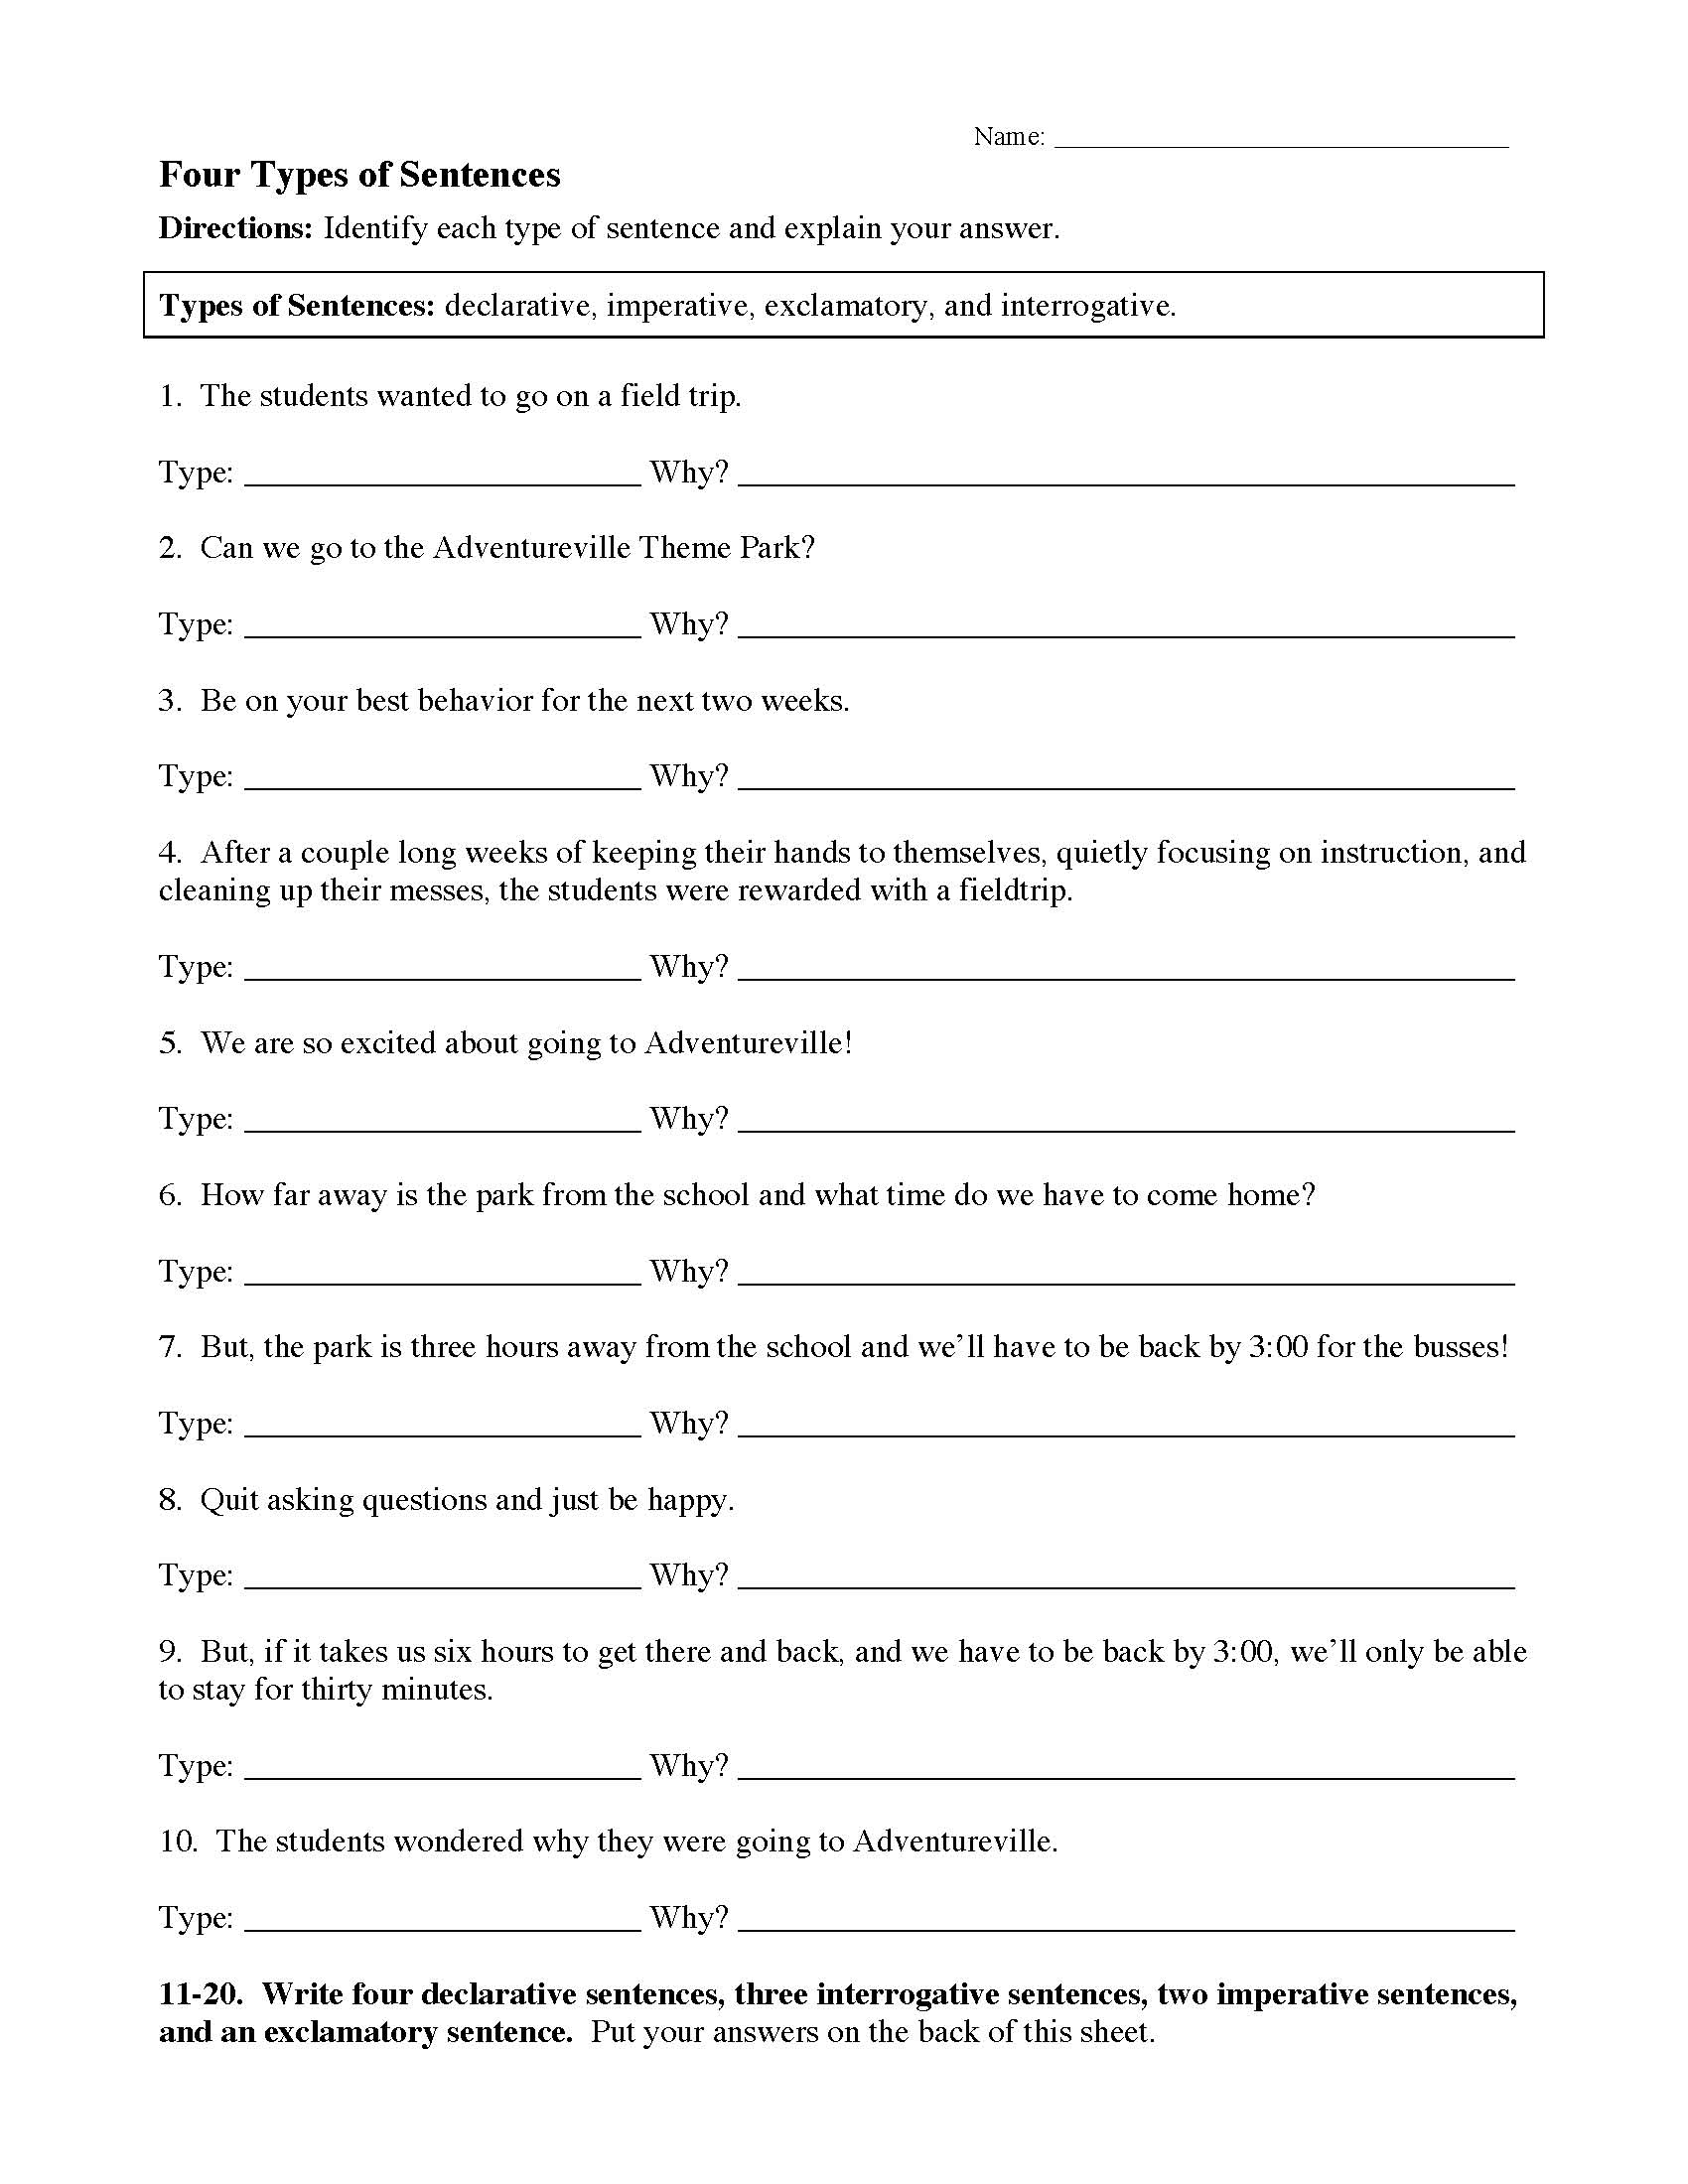 Four Types of Sentences Worksheet  Preview For 4 Types Of Sentences Worksheet